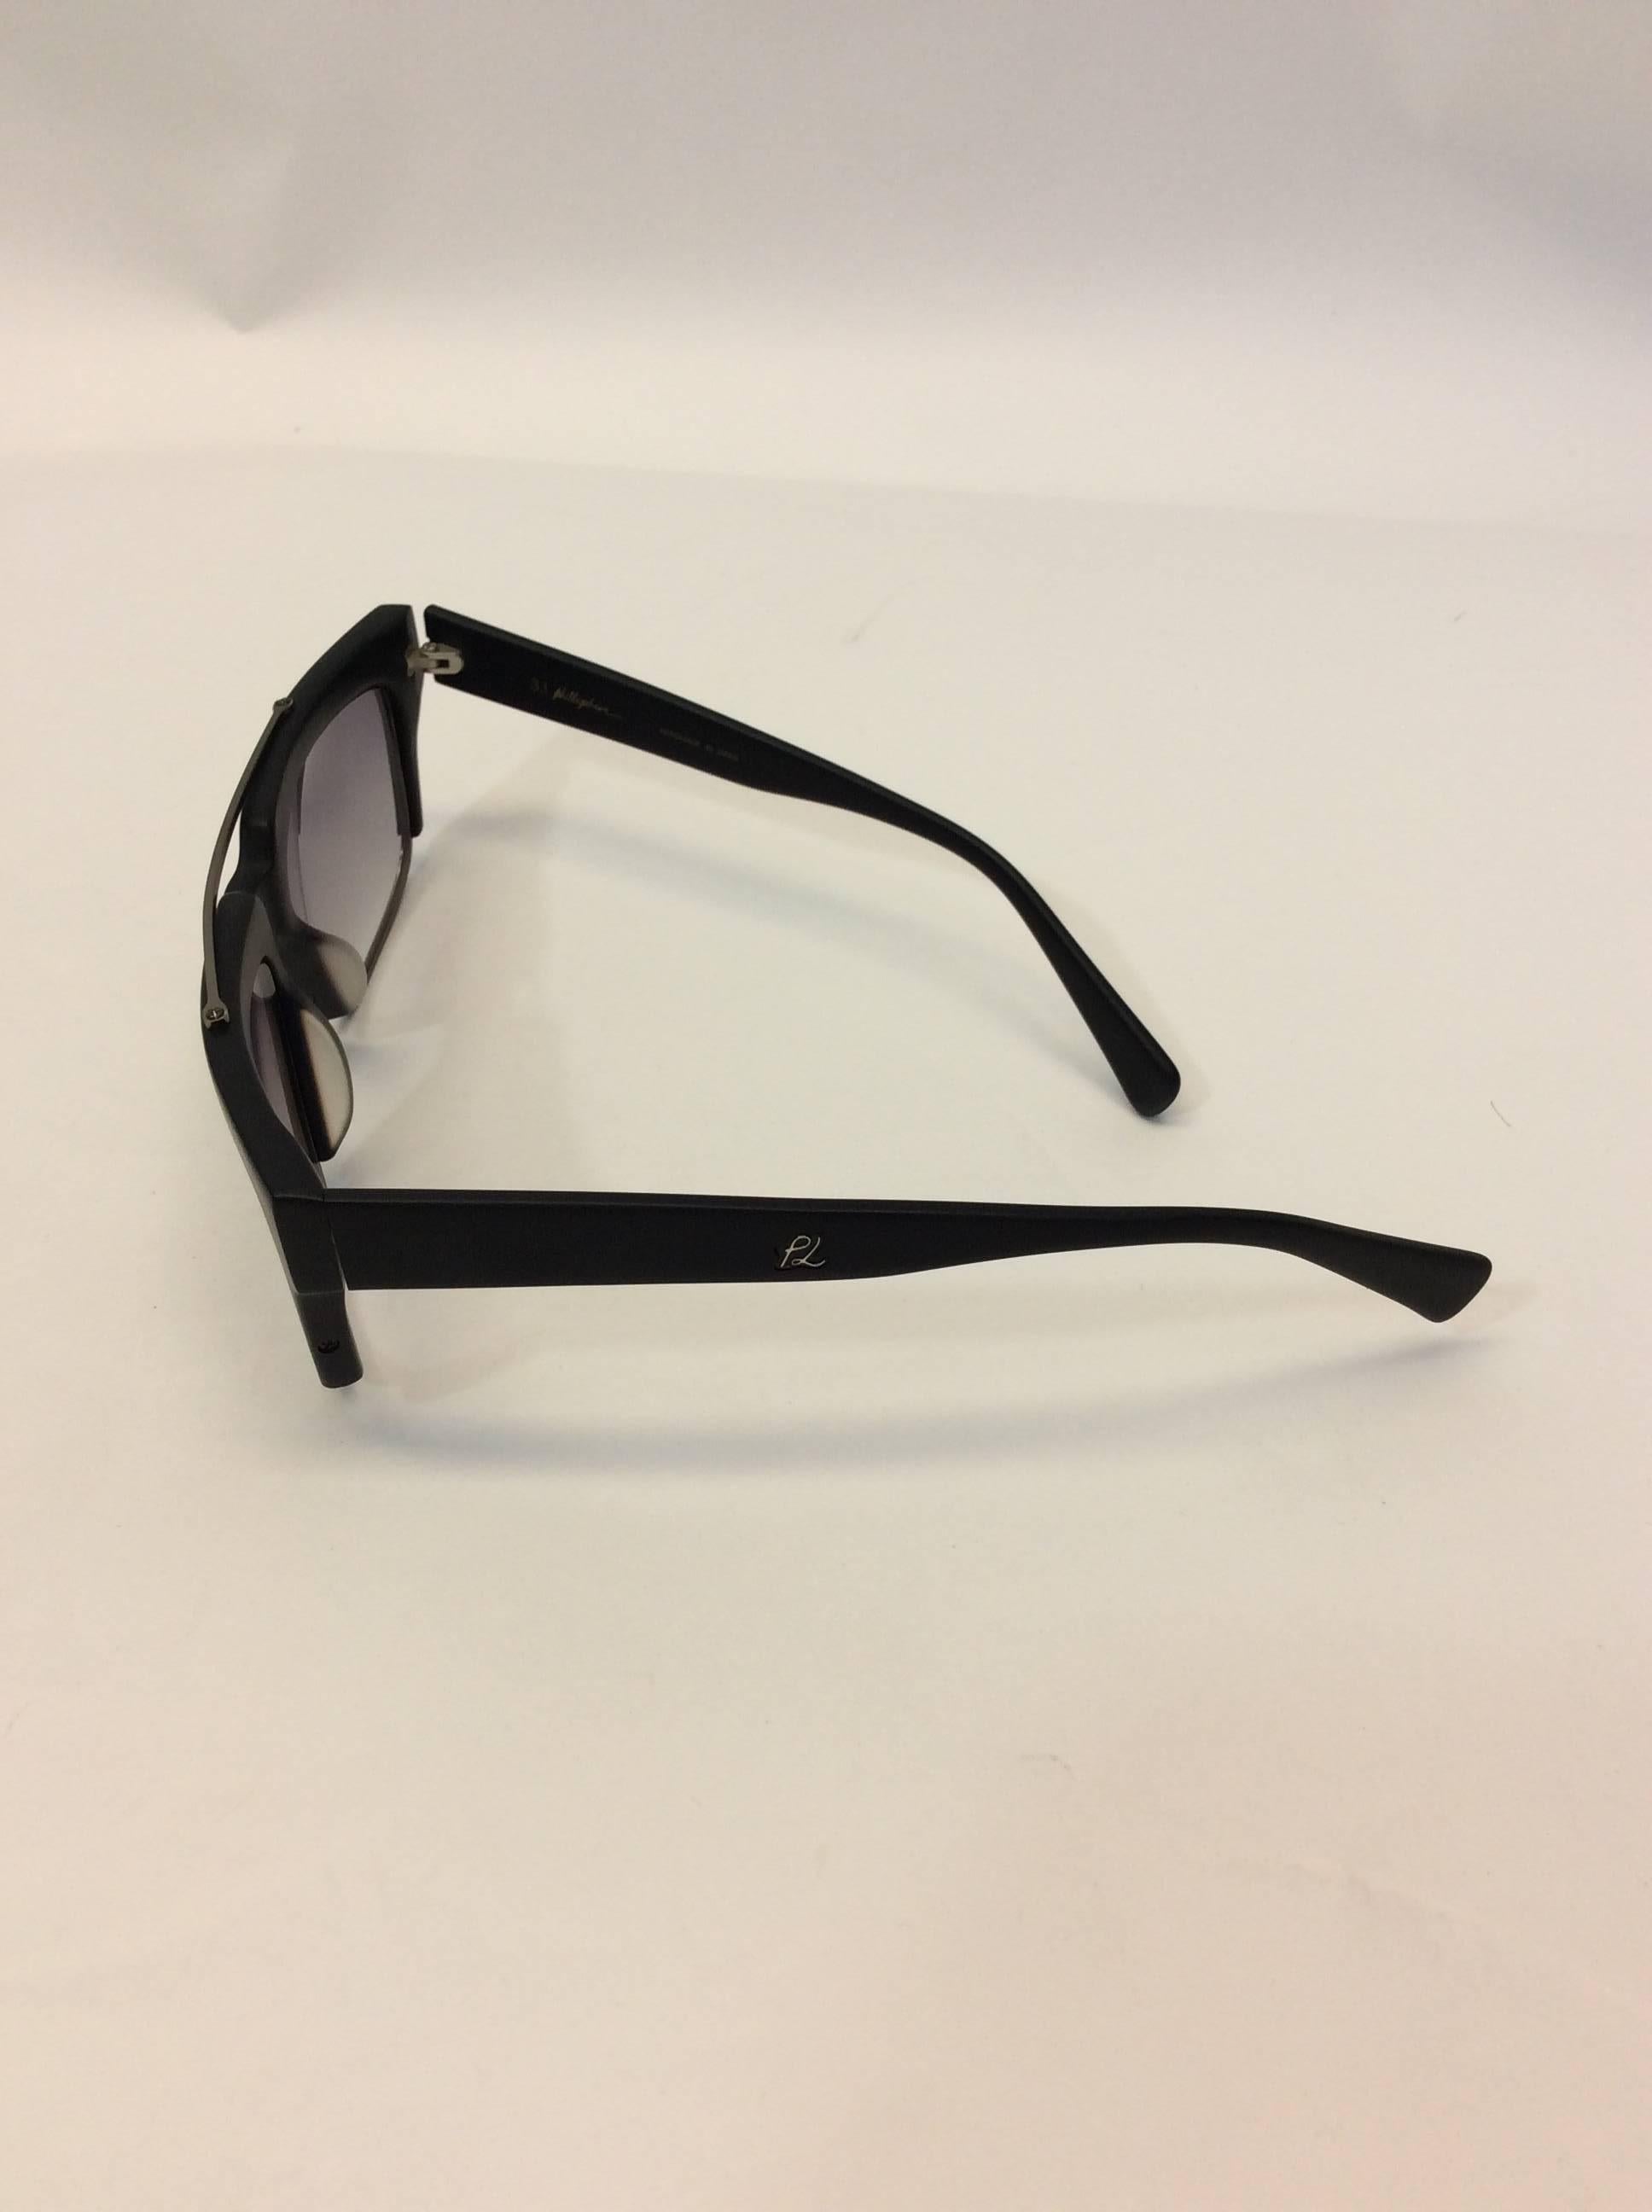 Phillip Lim Donahoue Mod Black Square Sunglasses In Excellent Condition For Sale In Narberth, PA